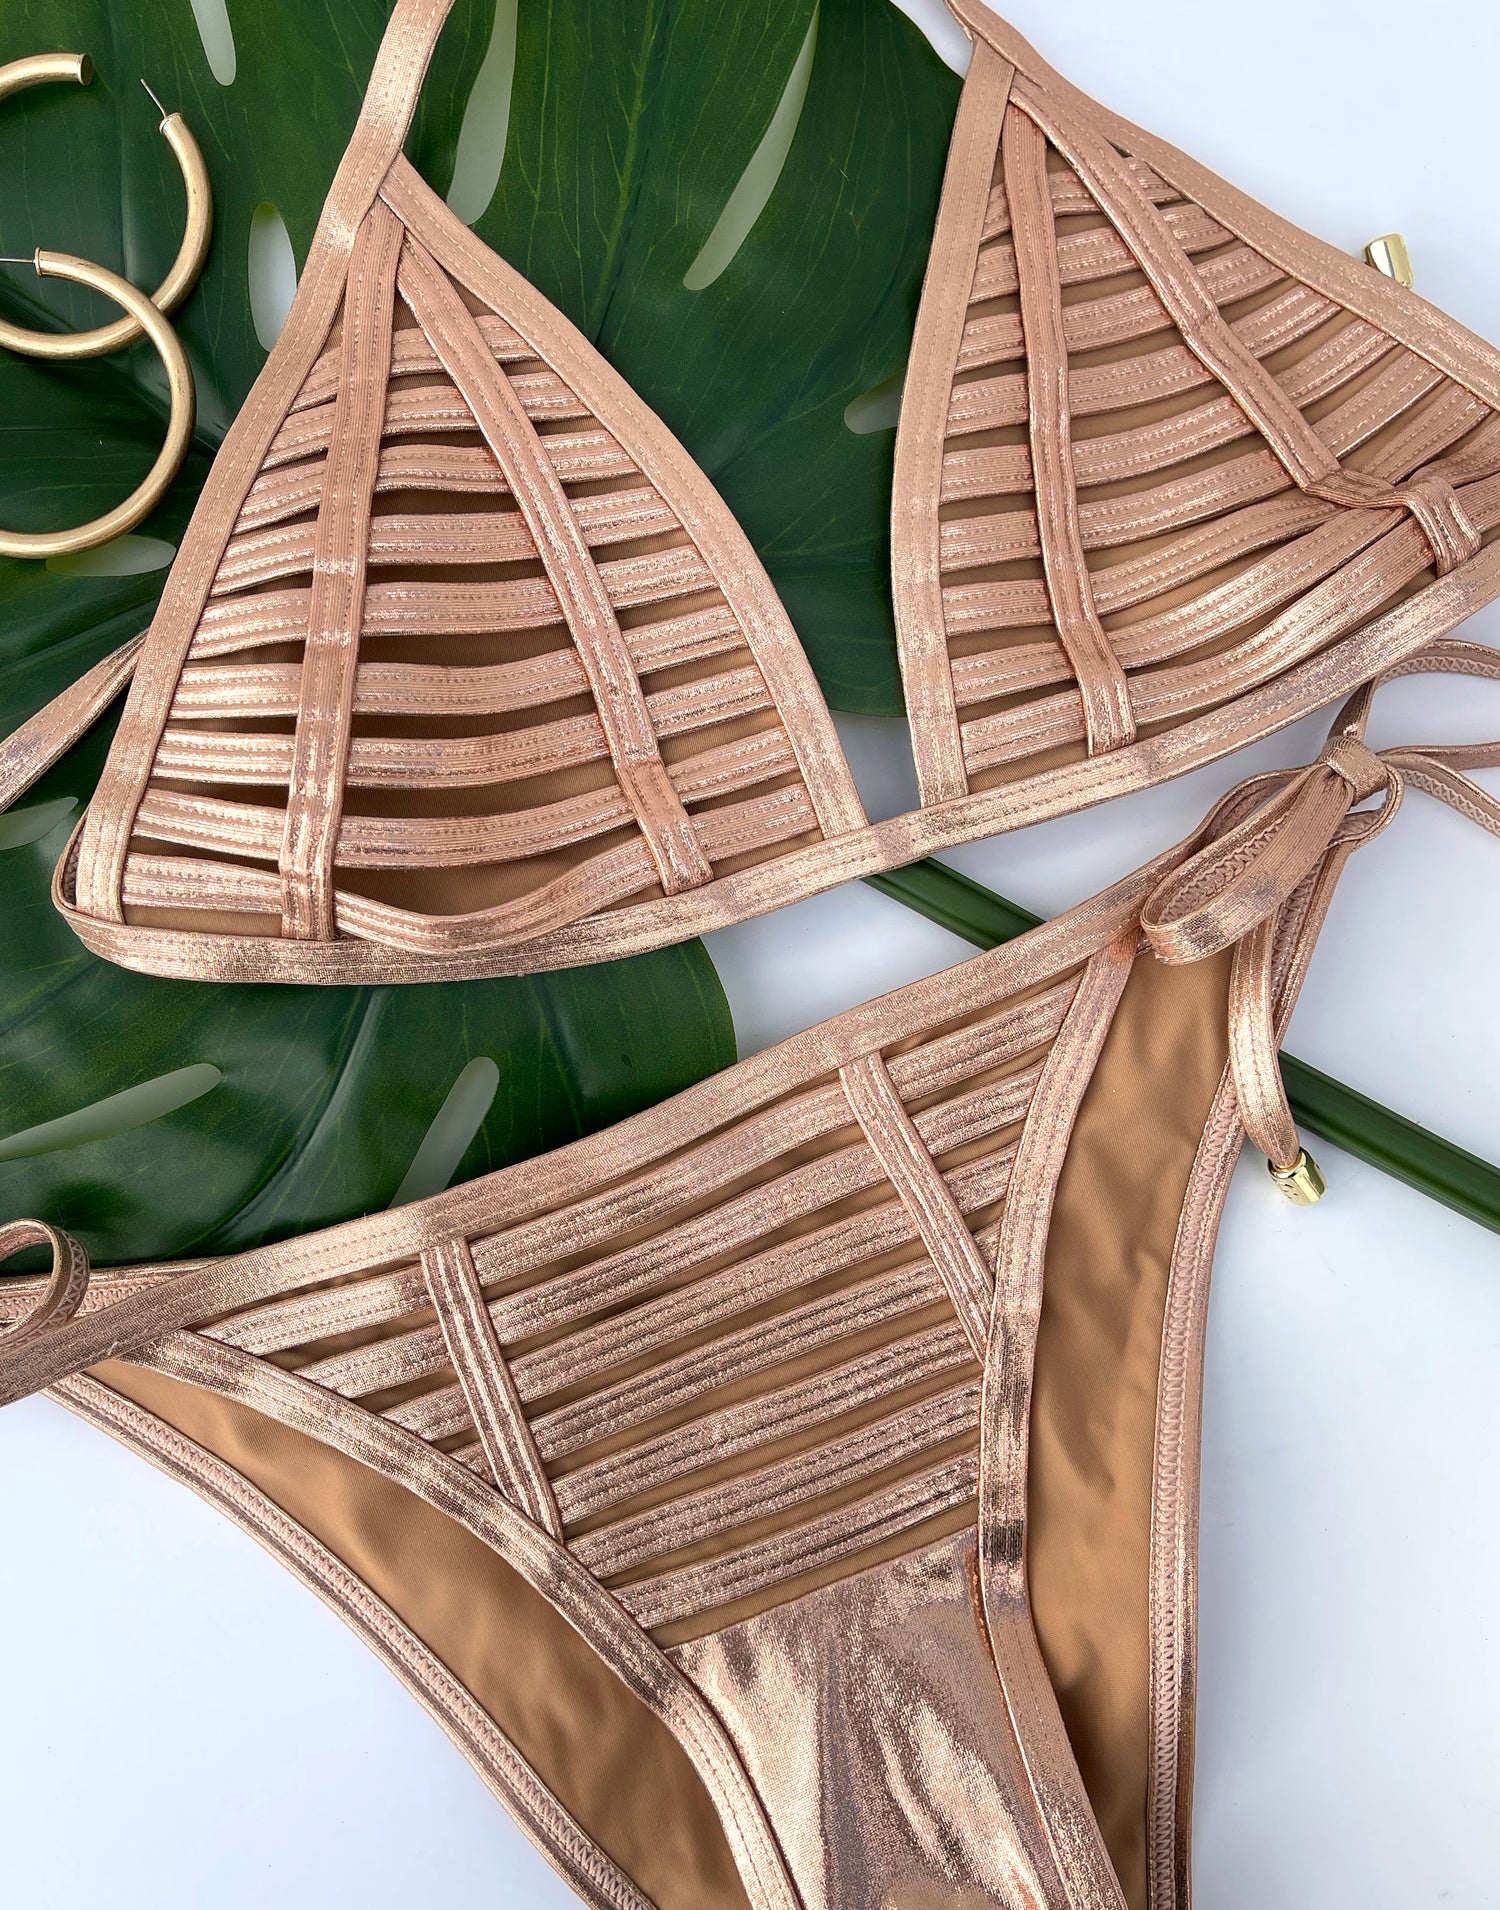 Hard Summer Triangle Bikini Top in Rose Gold with Nude Lining - Product View